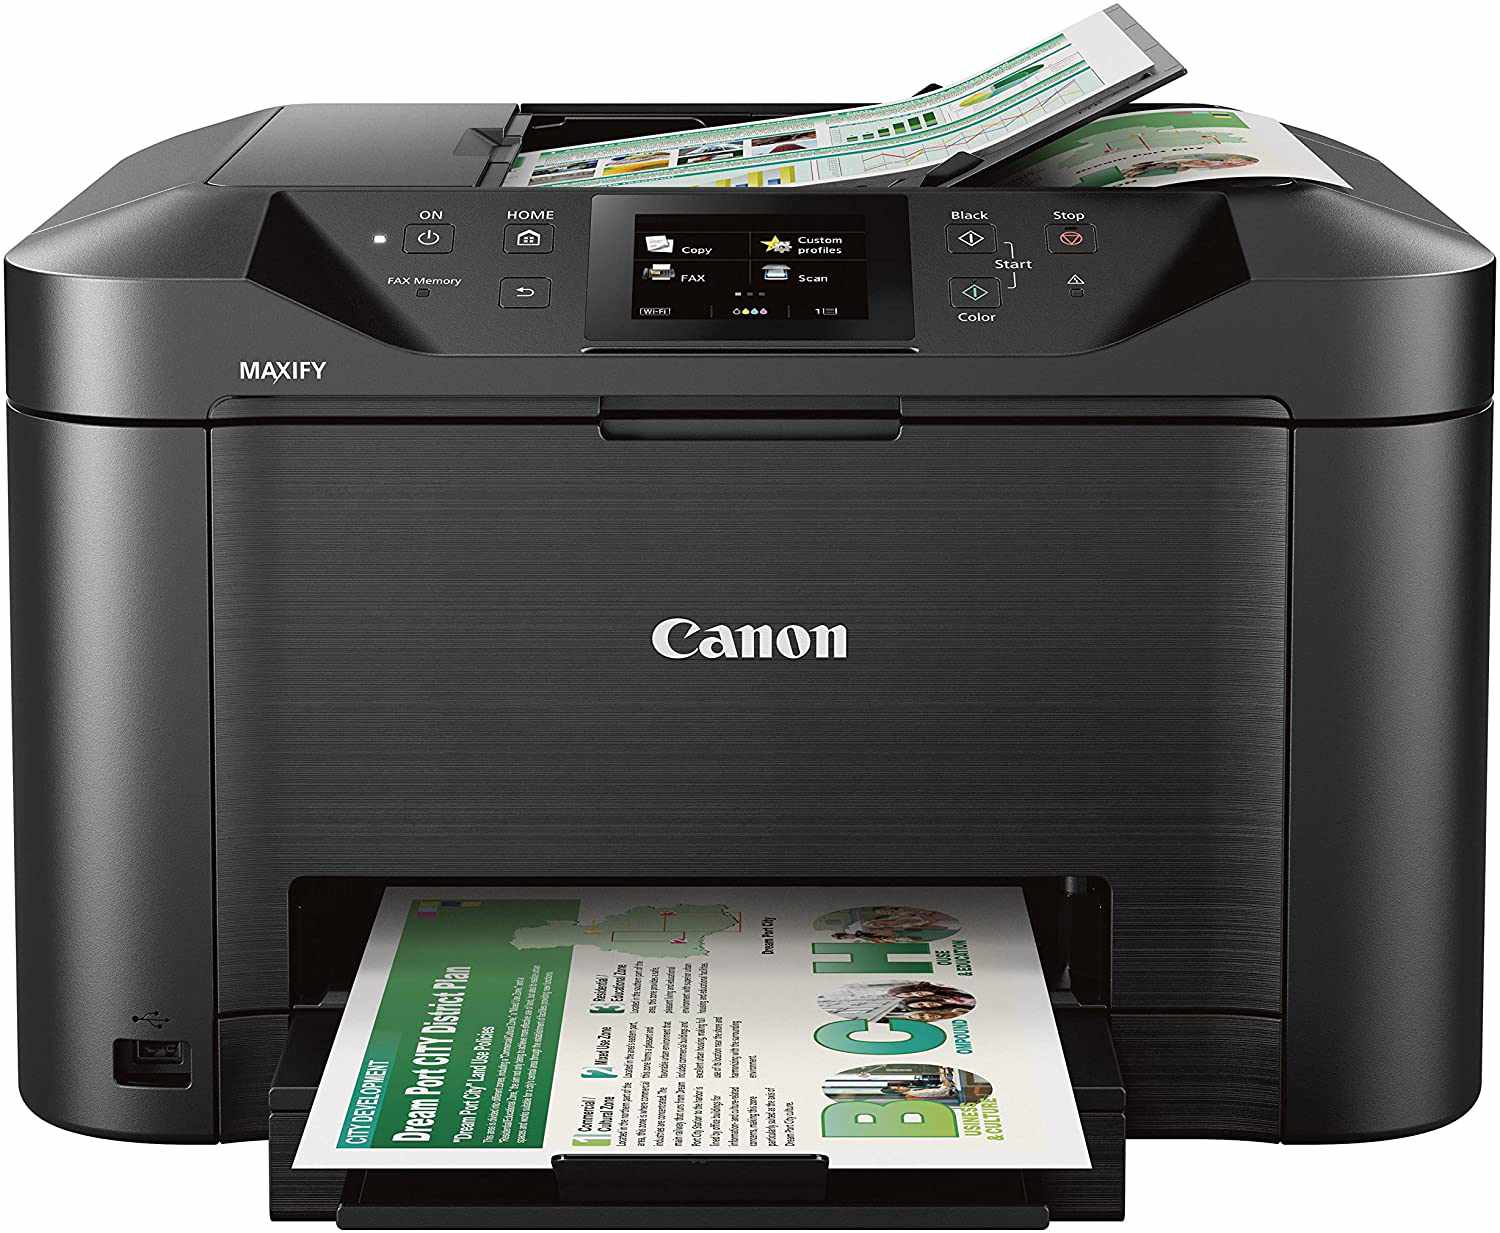 Canon Office and Business MB5120 All-in-One Printer, Scanner, Copier and Fax, with Mobile and Duplex Printing